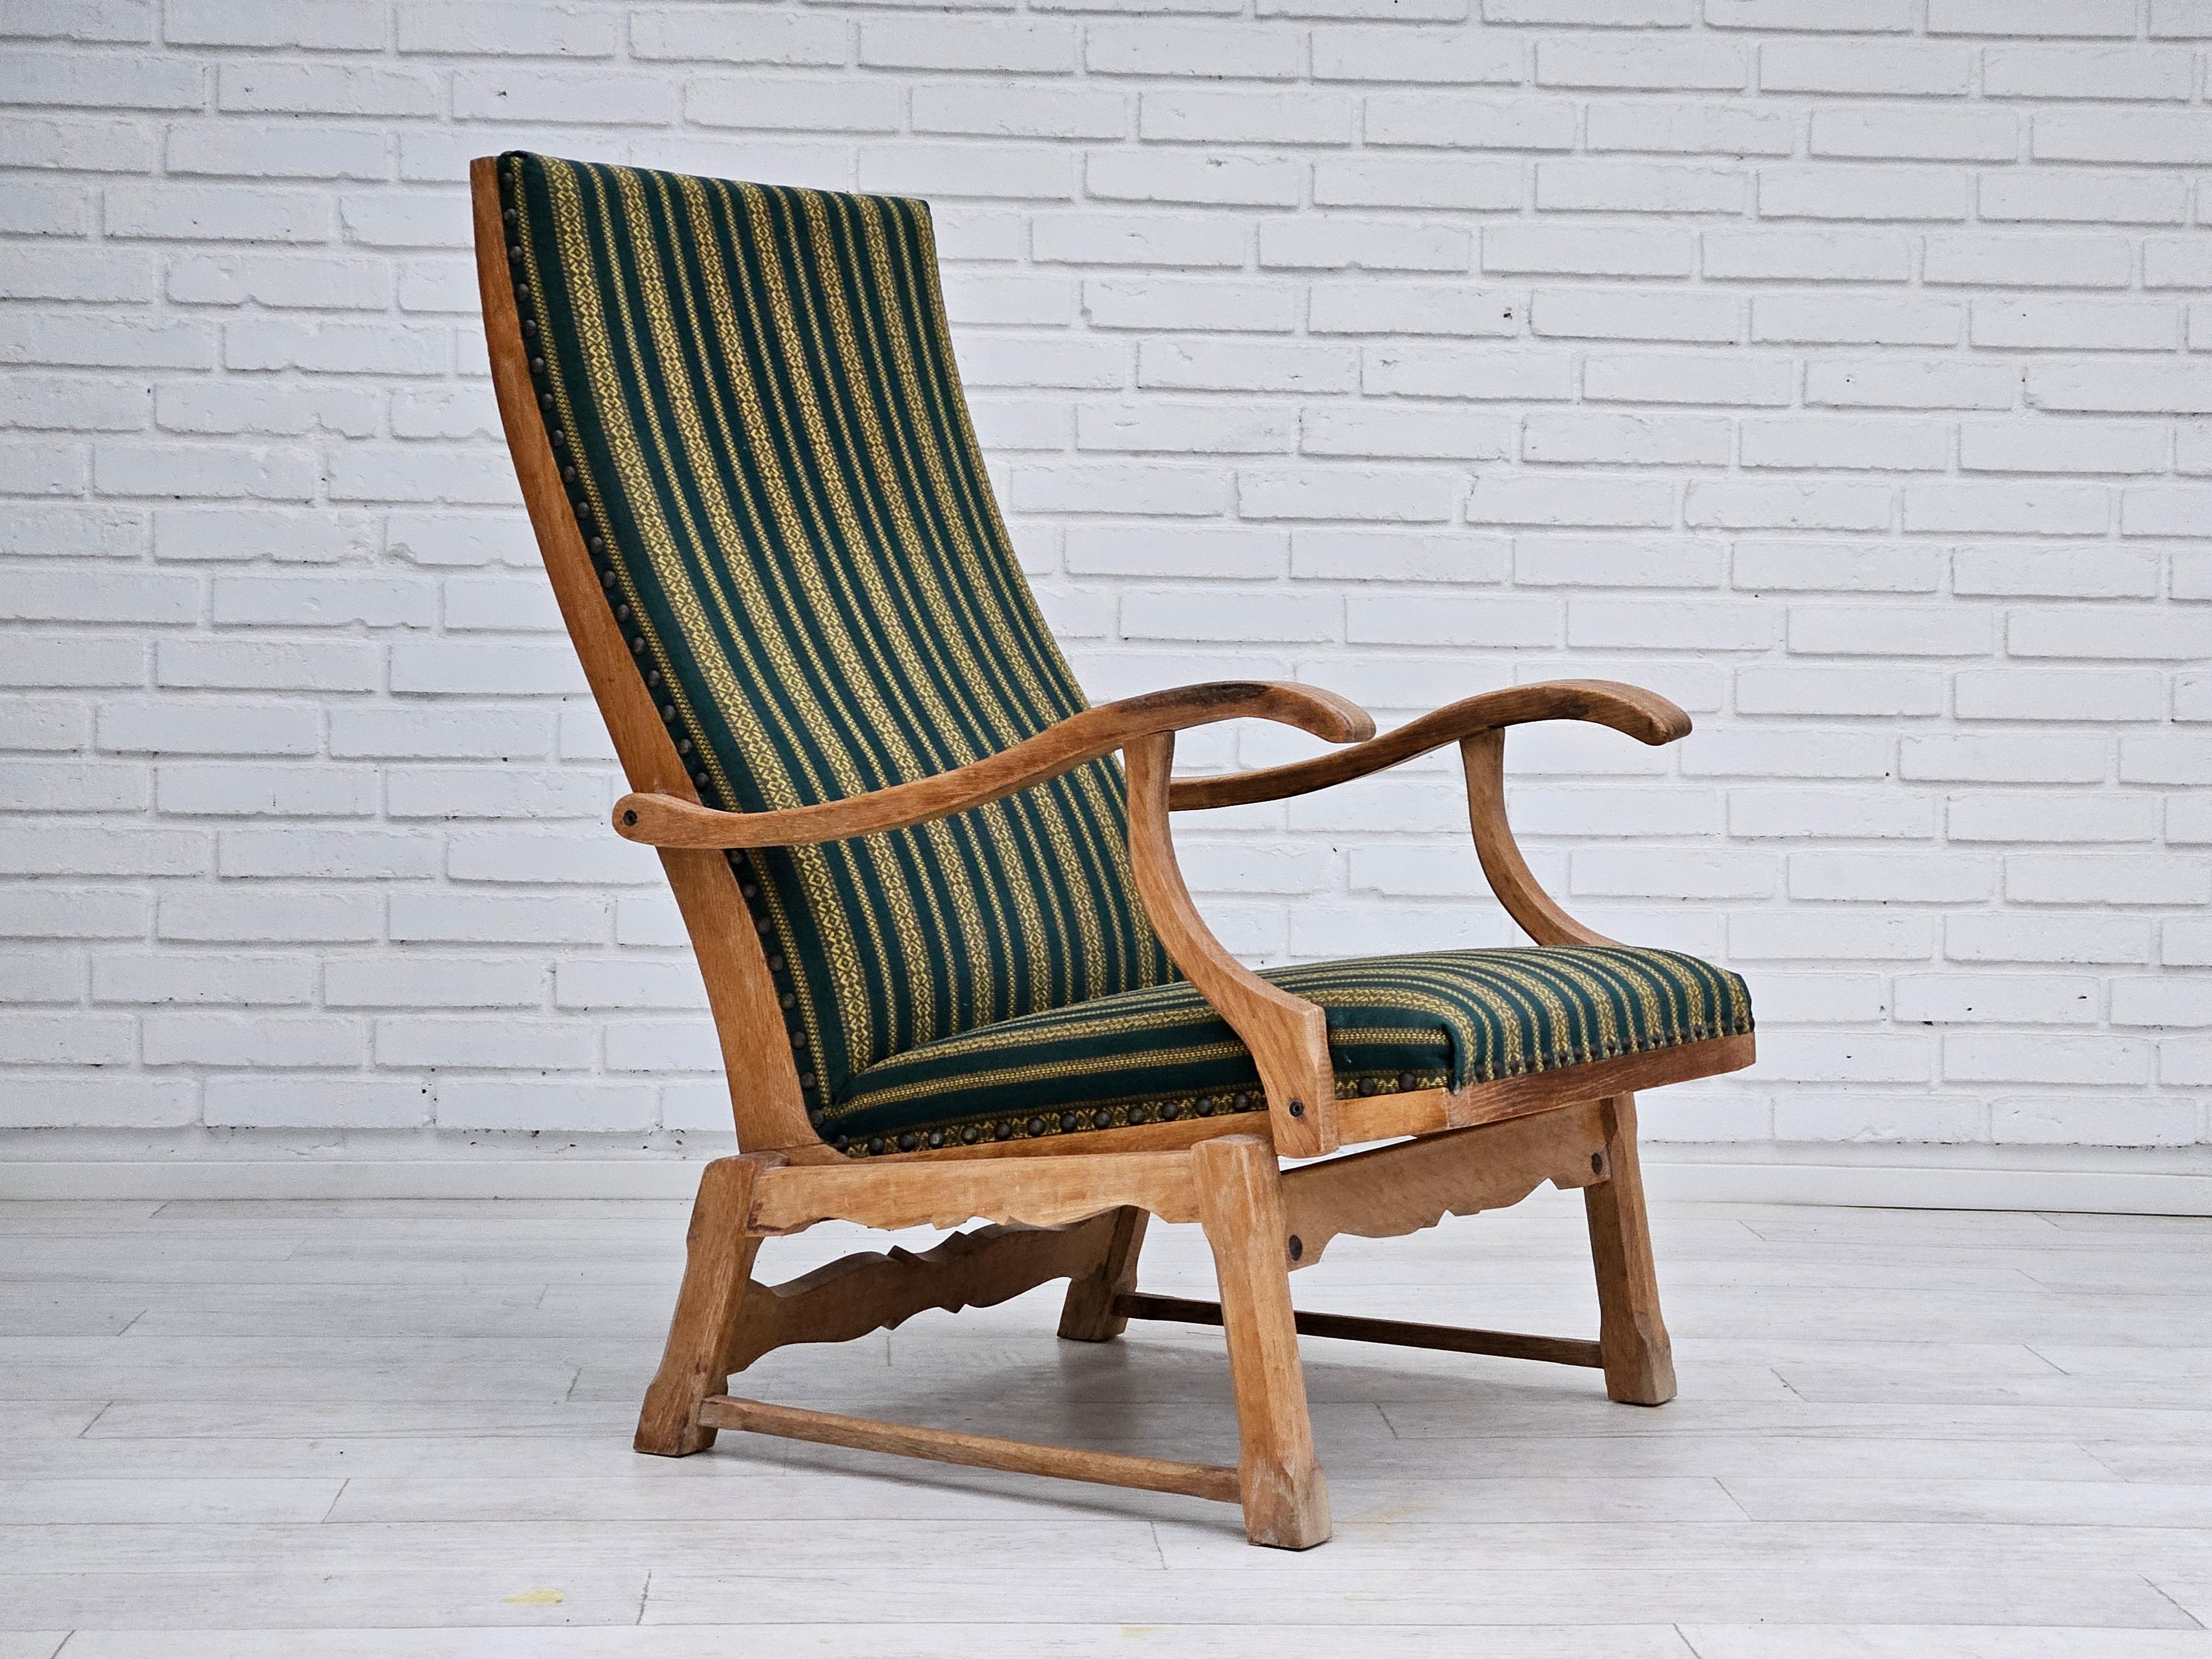 1950-60s Danish highback rocking chair in original very good condition. No smells and no stains. Furniture wool and oak wood. Manufactured by Danish furniture manufacturer in about 1955s.